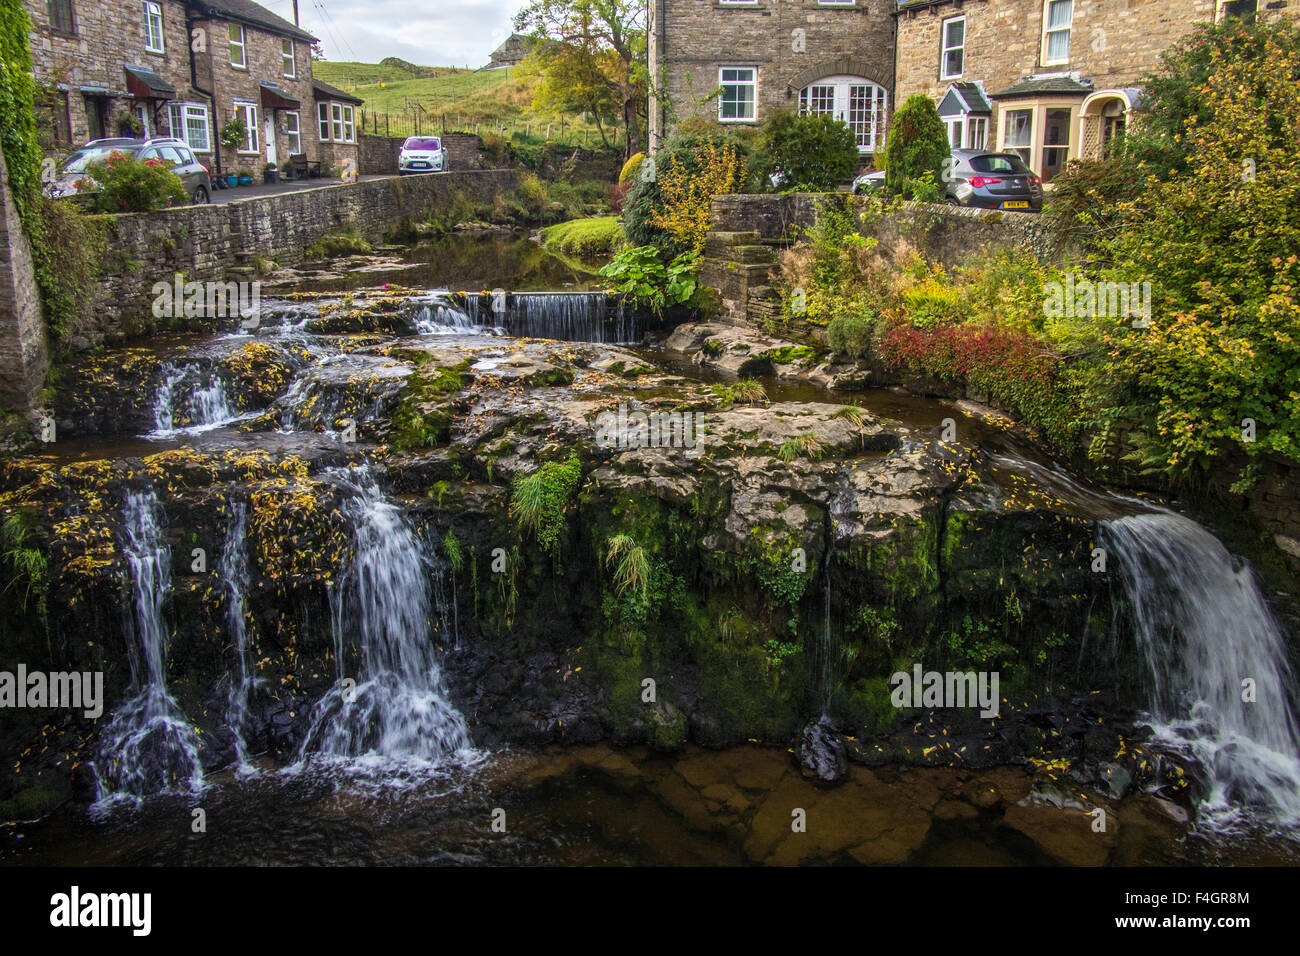 Hawes on the River Ure, Richmondshire, North Yorkshire, England. Stock Photo